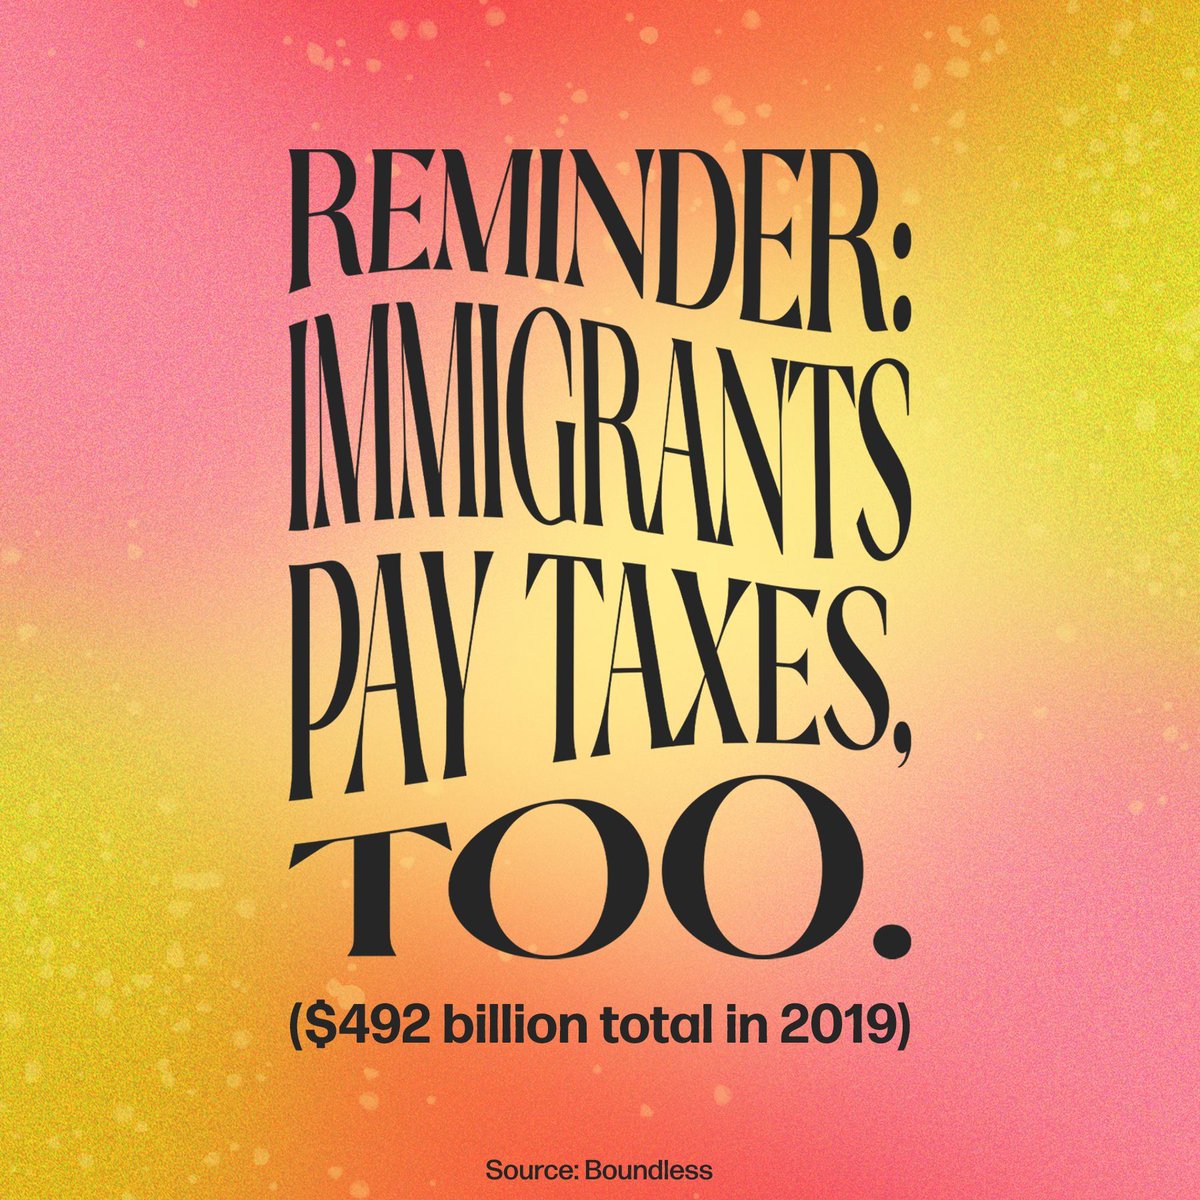 Don't fall for the myths! Contrary to what some might claim, immigrants do pay taxes and contribute significantly to our economy. Let's debunk the false narratives and recognize the truth: immigrants are vital contributors to our society and deserve respect, not misinformation.